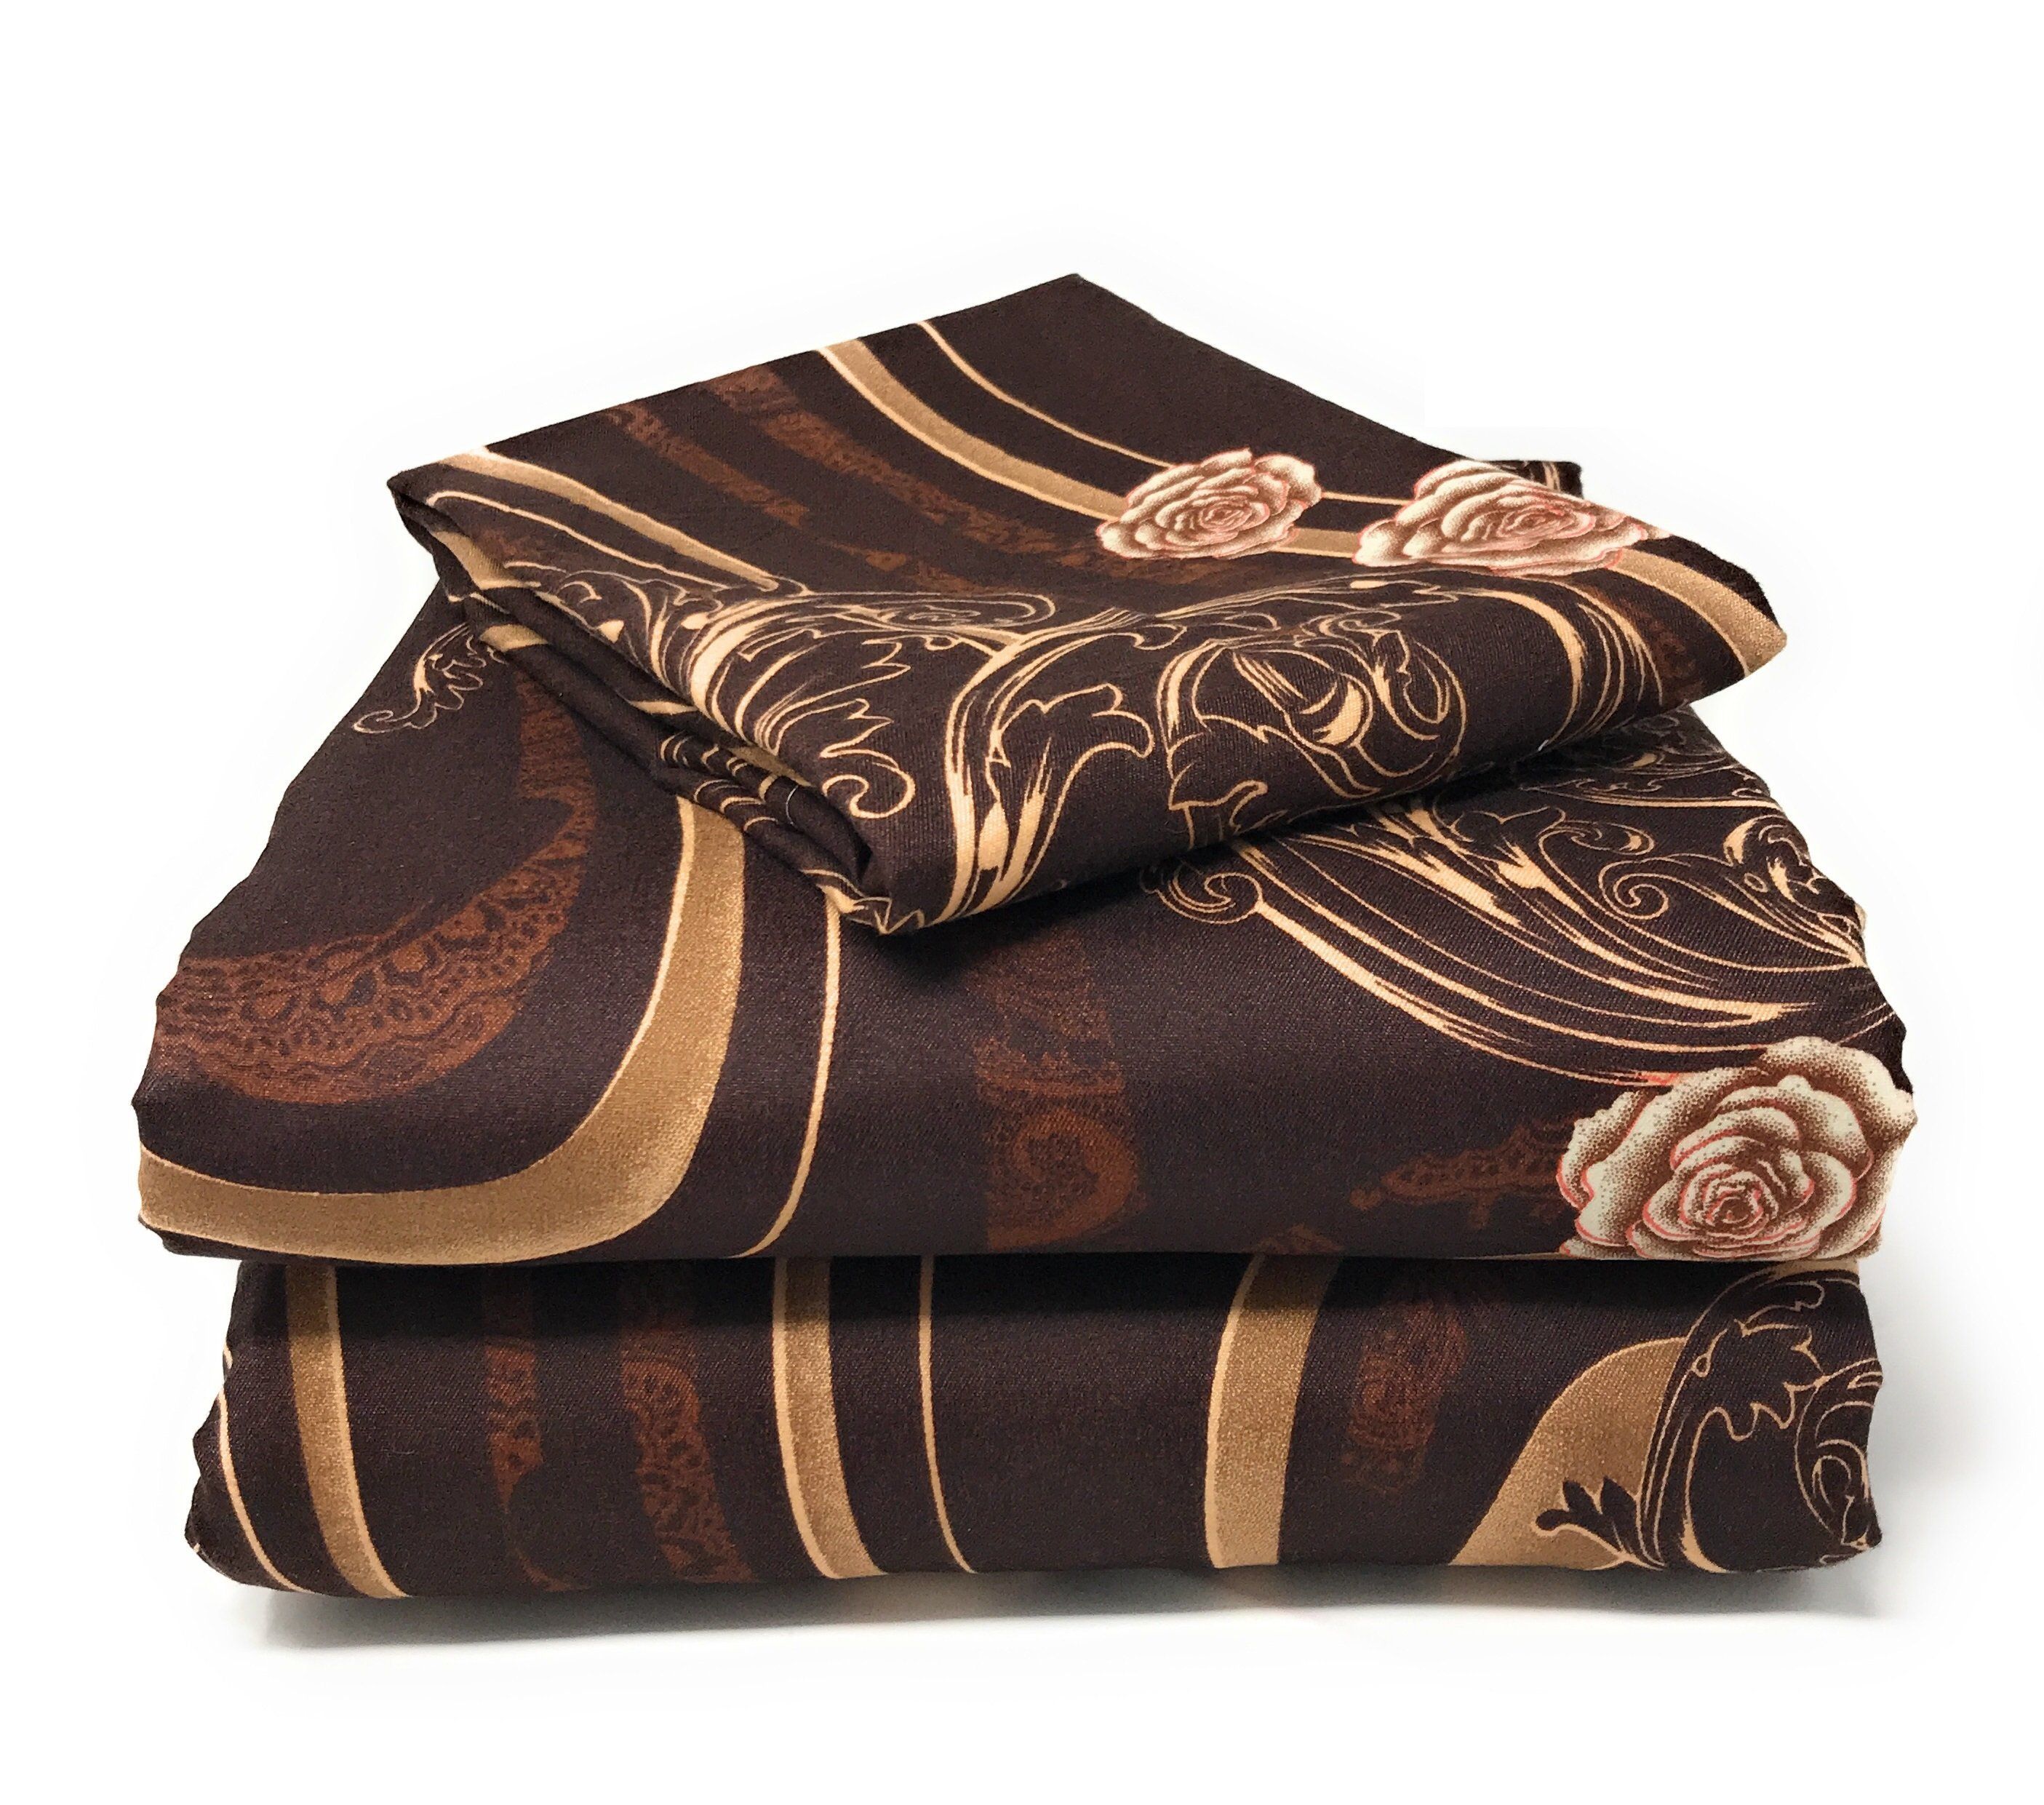 Tache Melted Gold Brown Floral Duvet Cover Twin (2815) - Tache Home Fashion